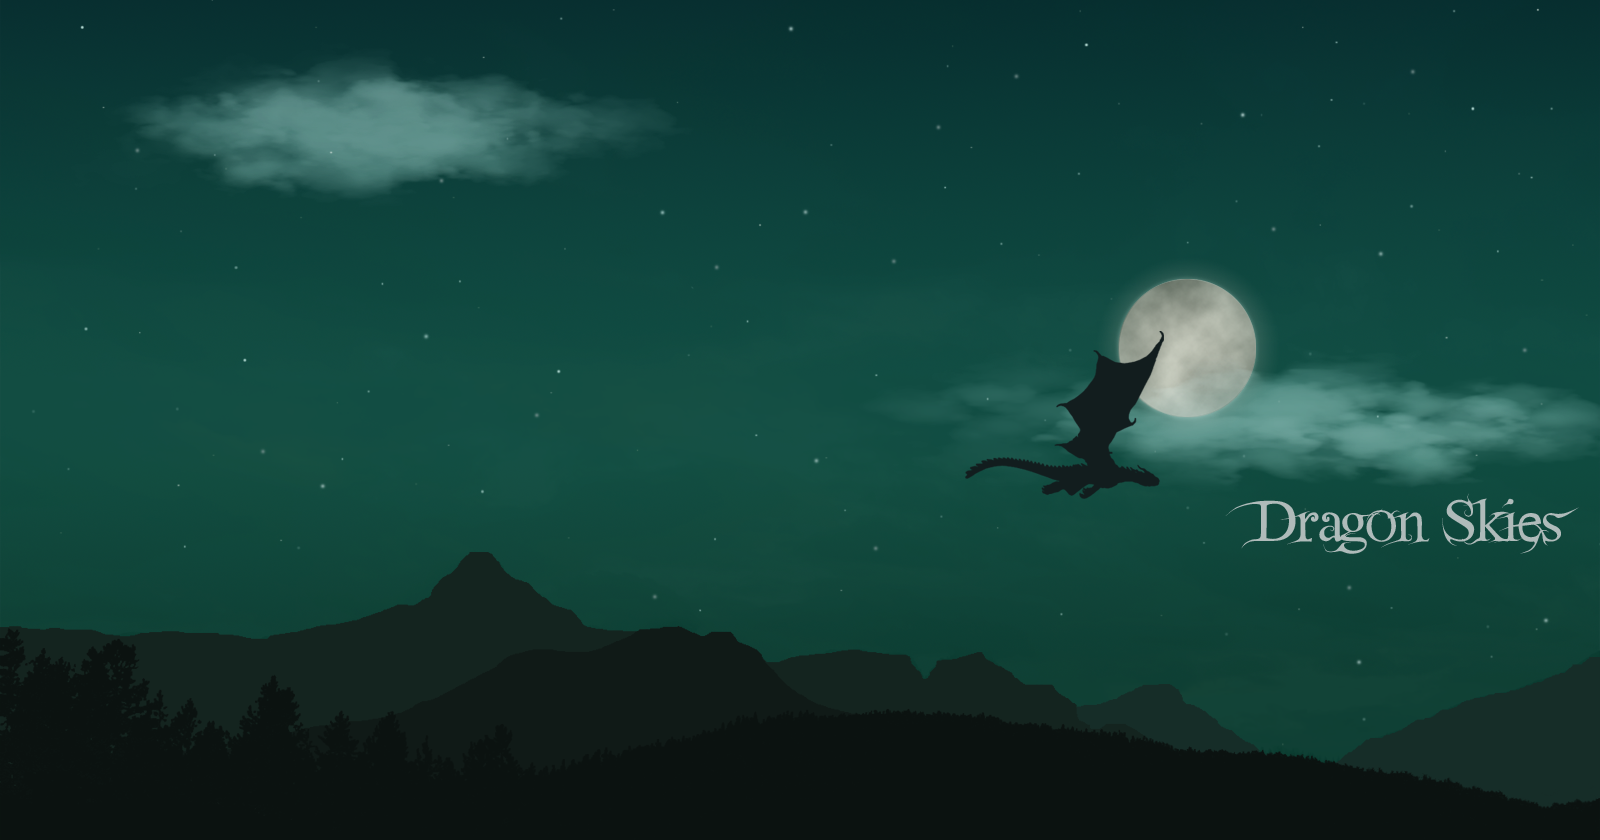 Dragon flying across an emerald colored night sky